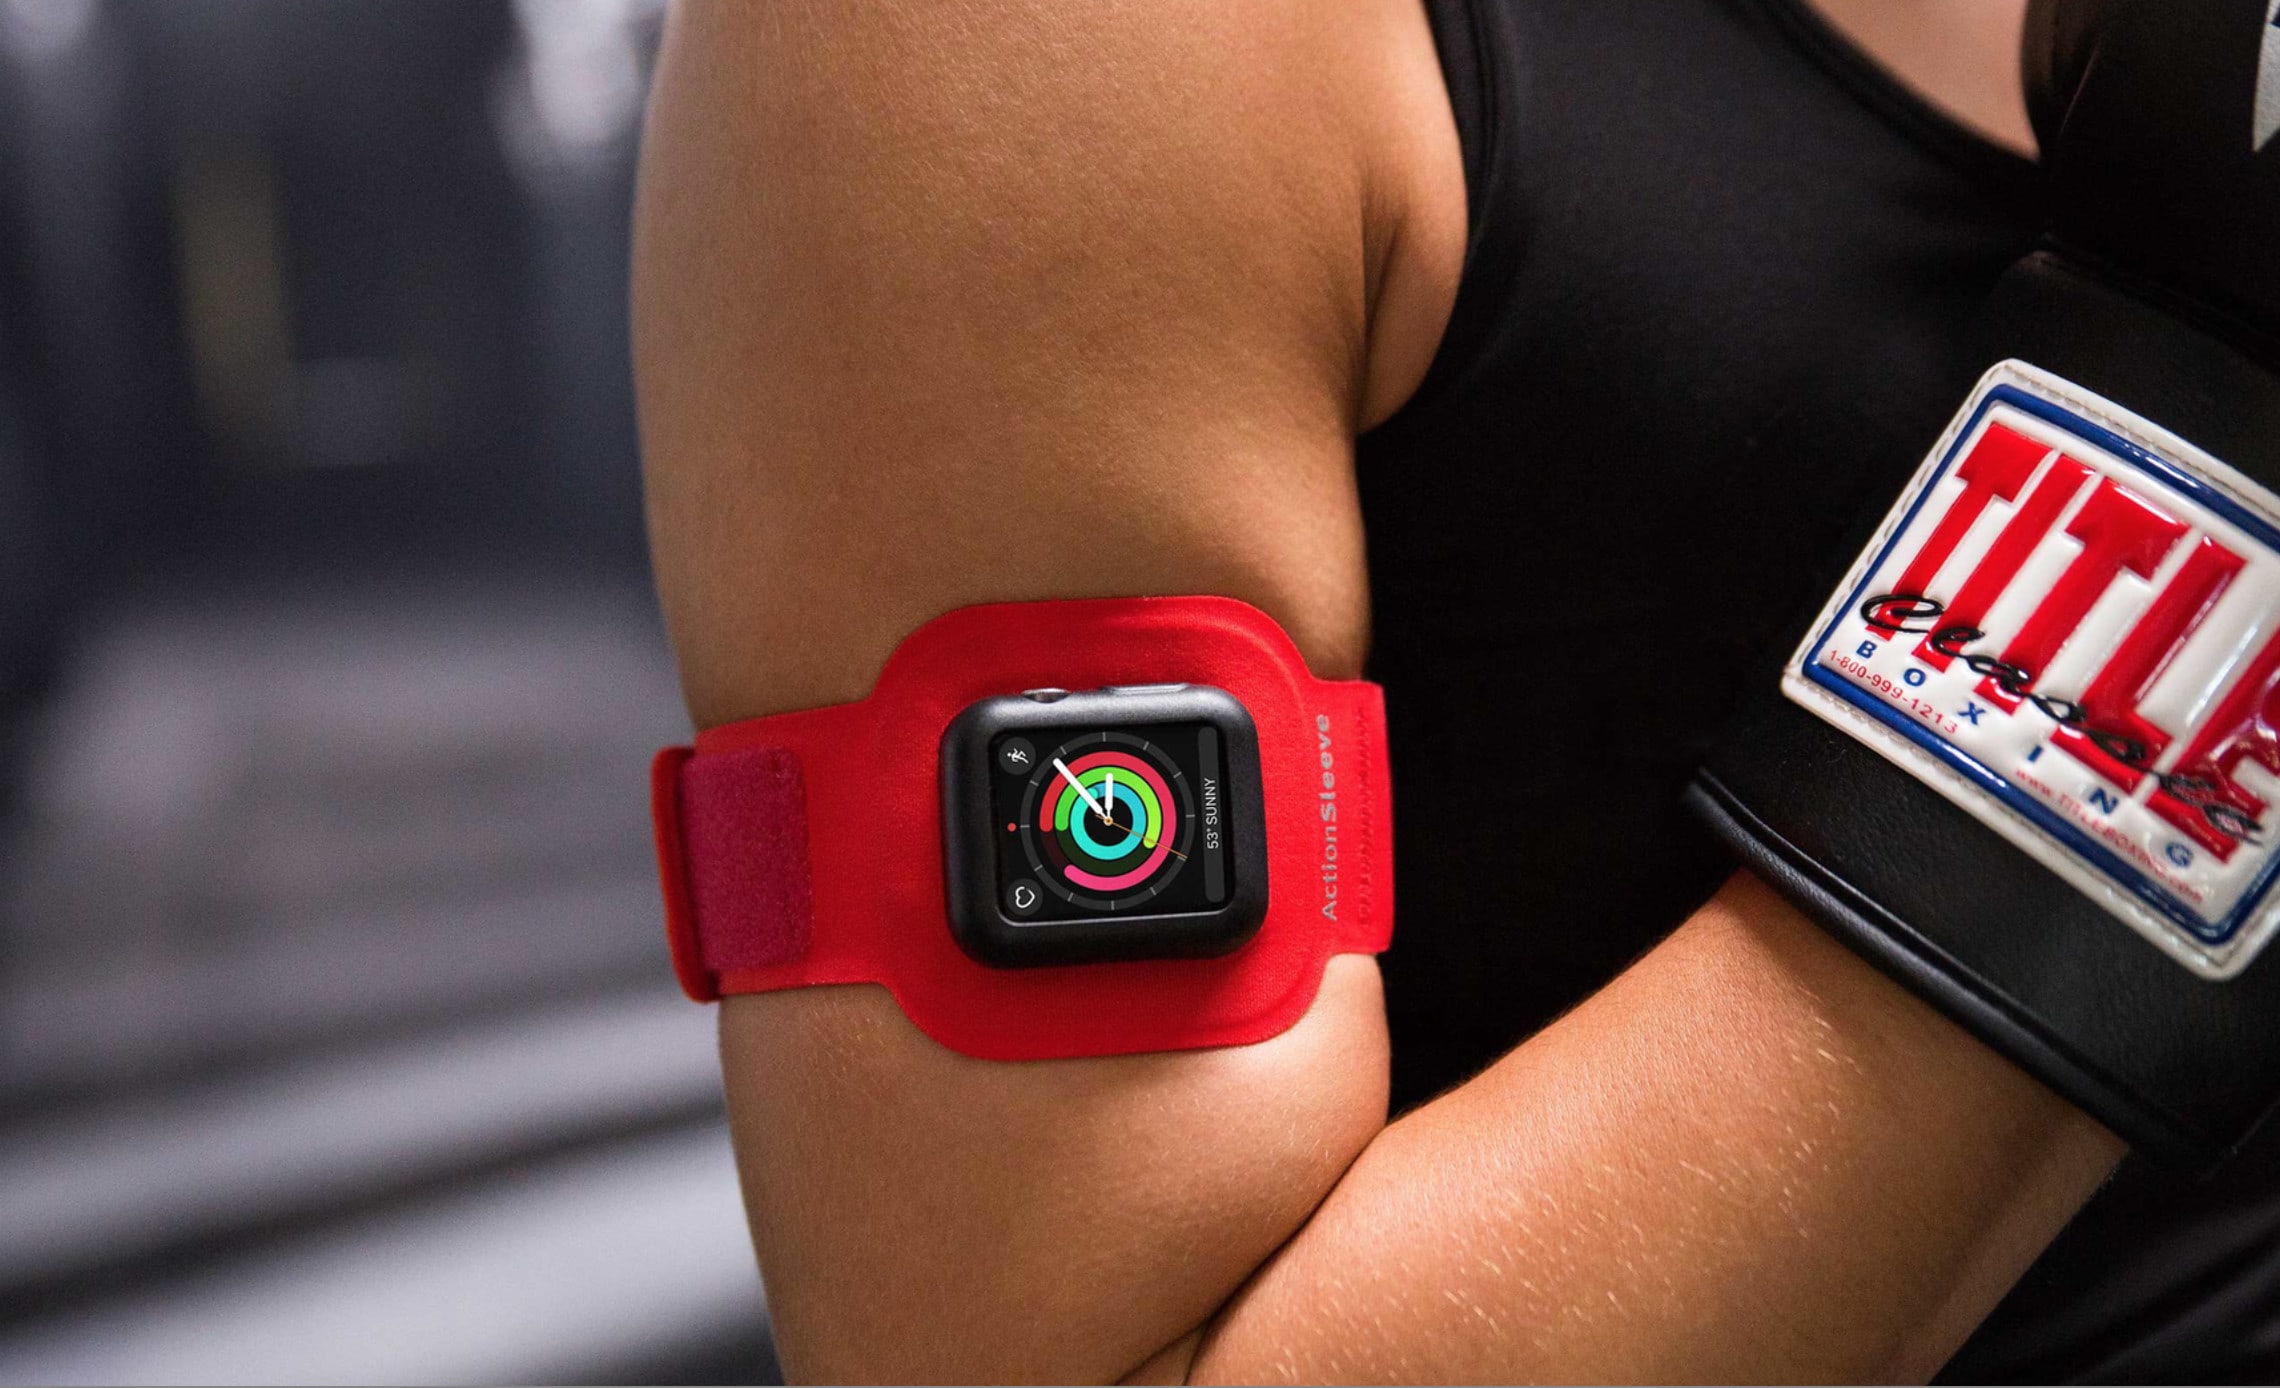 There are so many different sports and workouts, and some just aren’t ‘wrist-watch friendly’.